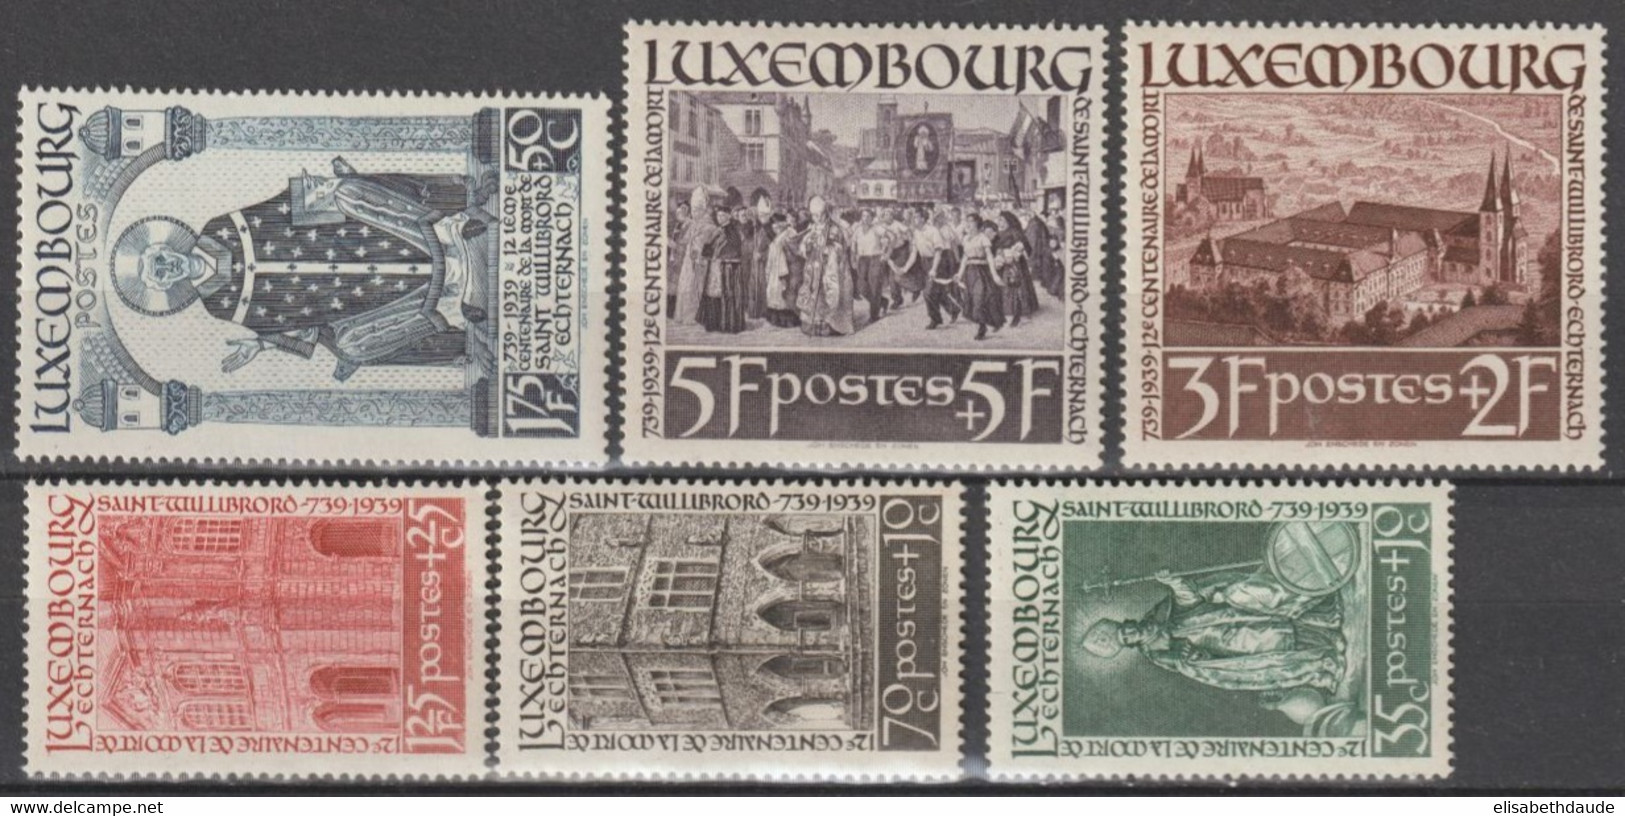 LUXEMBOURG - 1938 - SERIE COMPLETE YVERT N°300/305 * MLH  - COTE = 25 EUR. - Nuovi